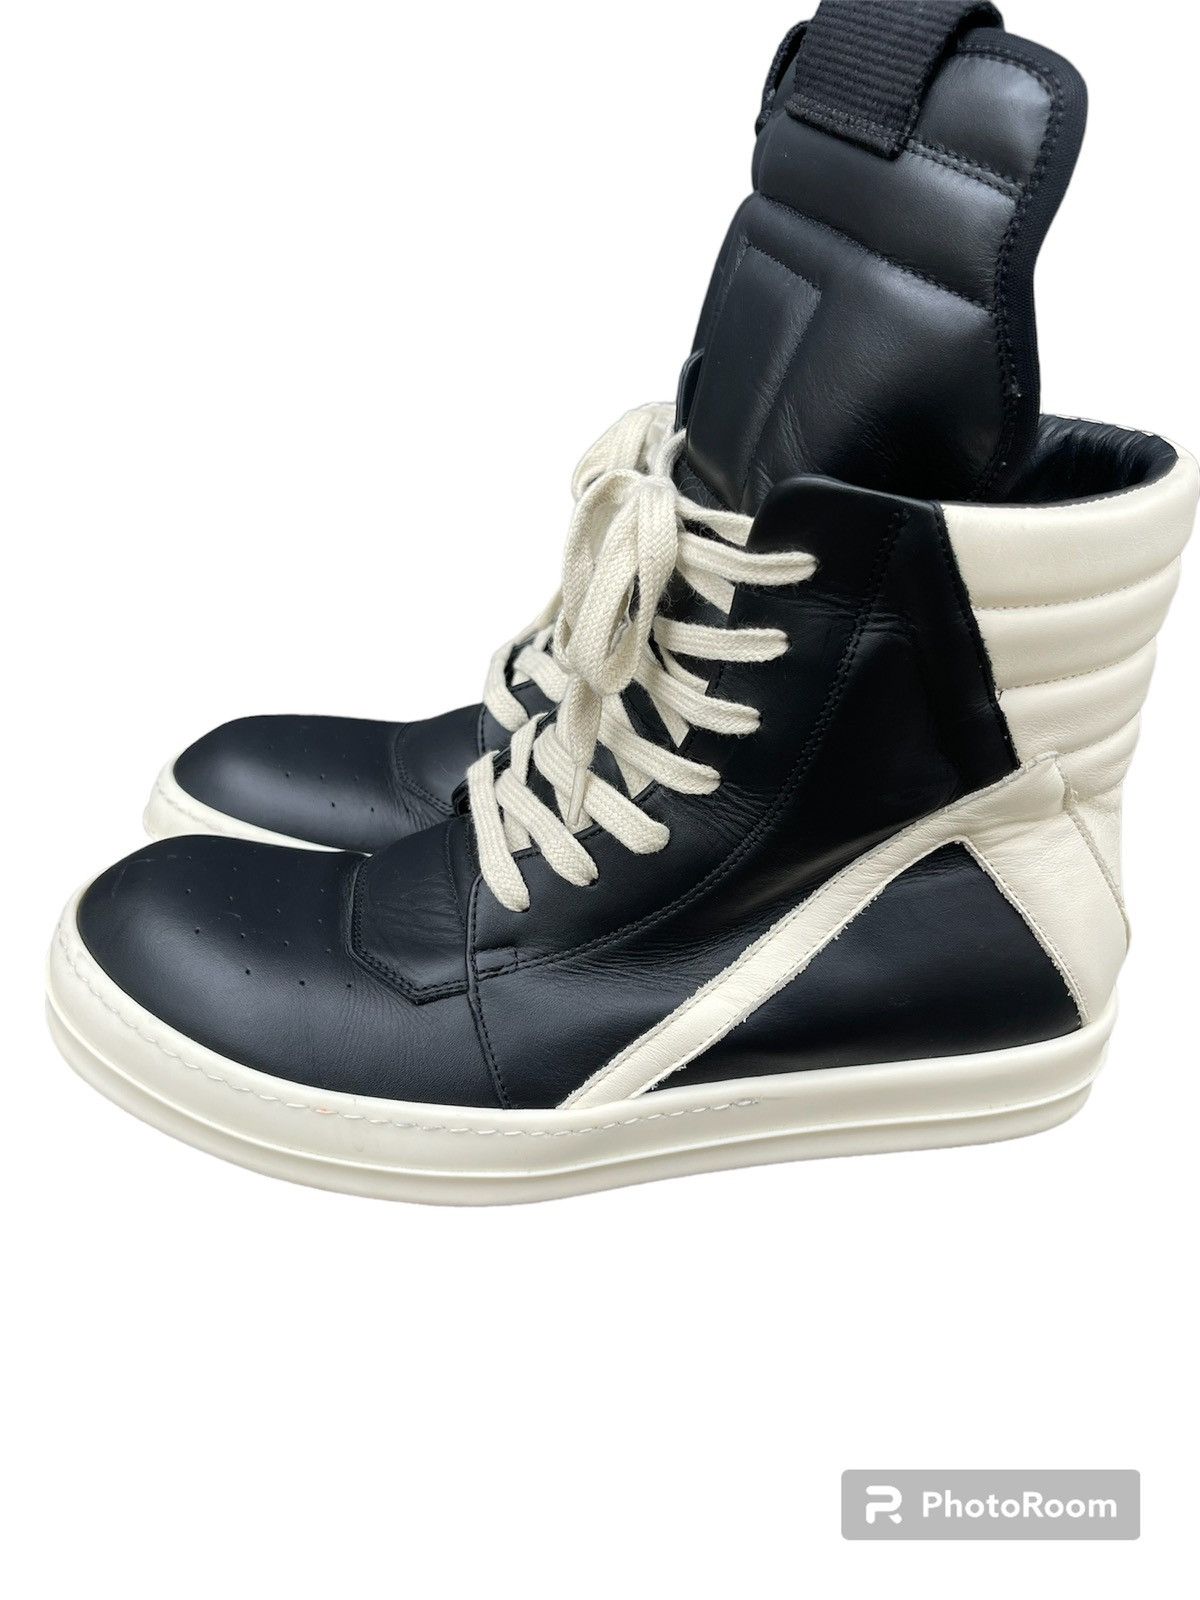 Pre-owned Archival Clothing X Rick Owens Geobaskets Black Milk Shoes